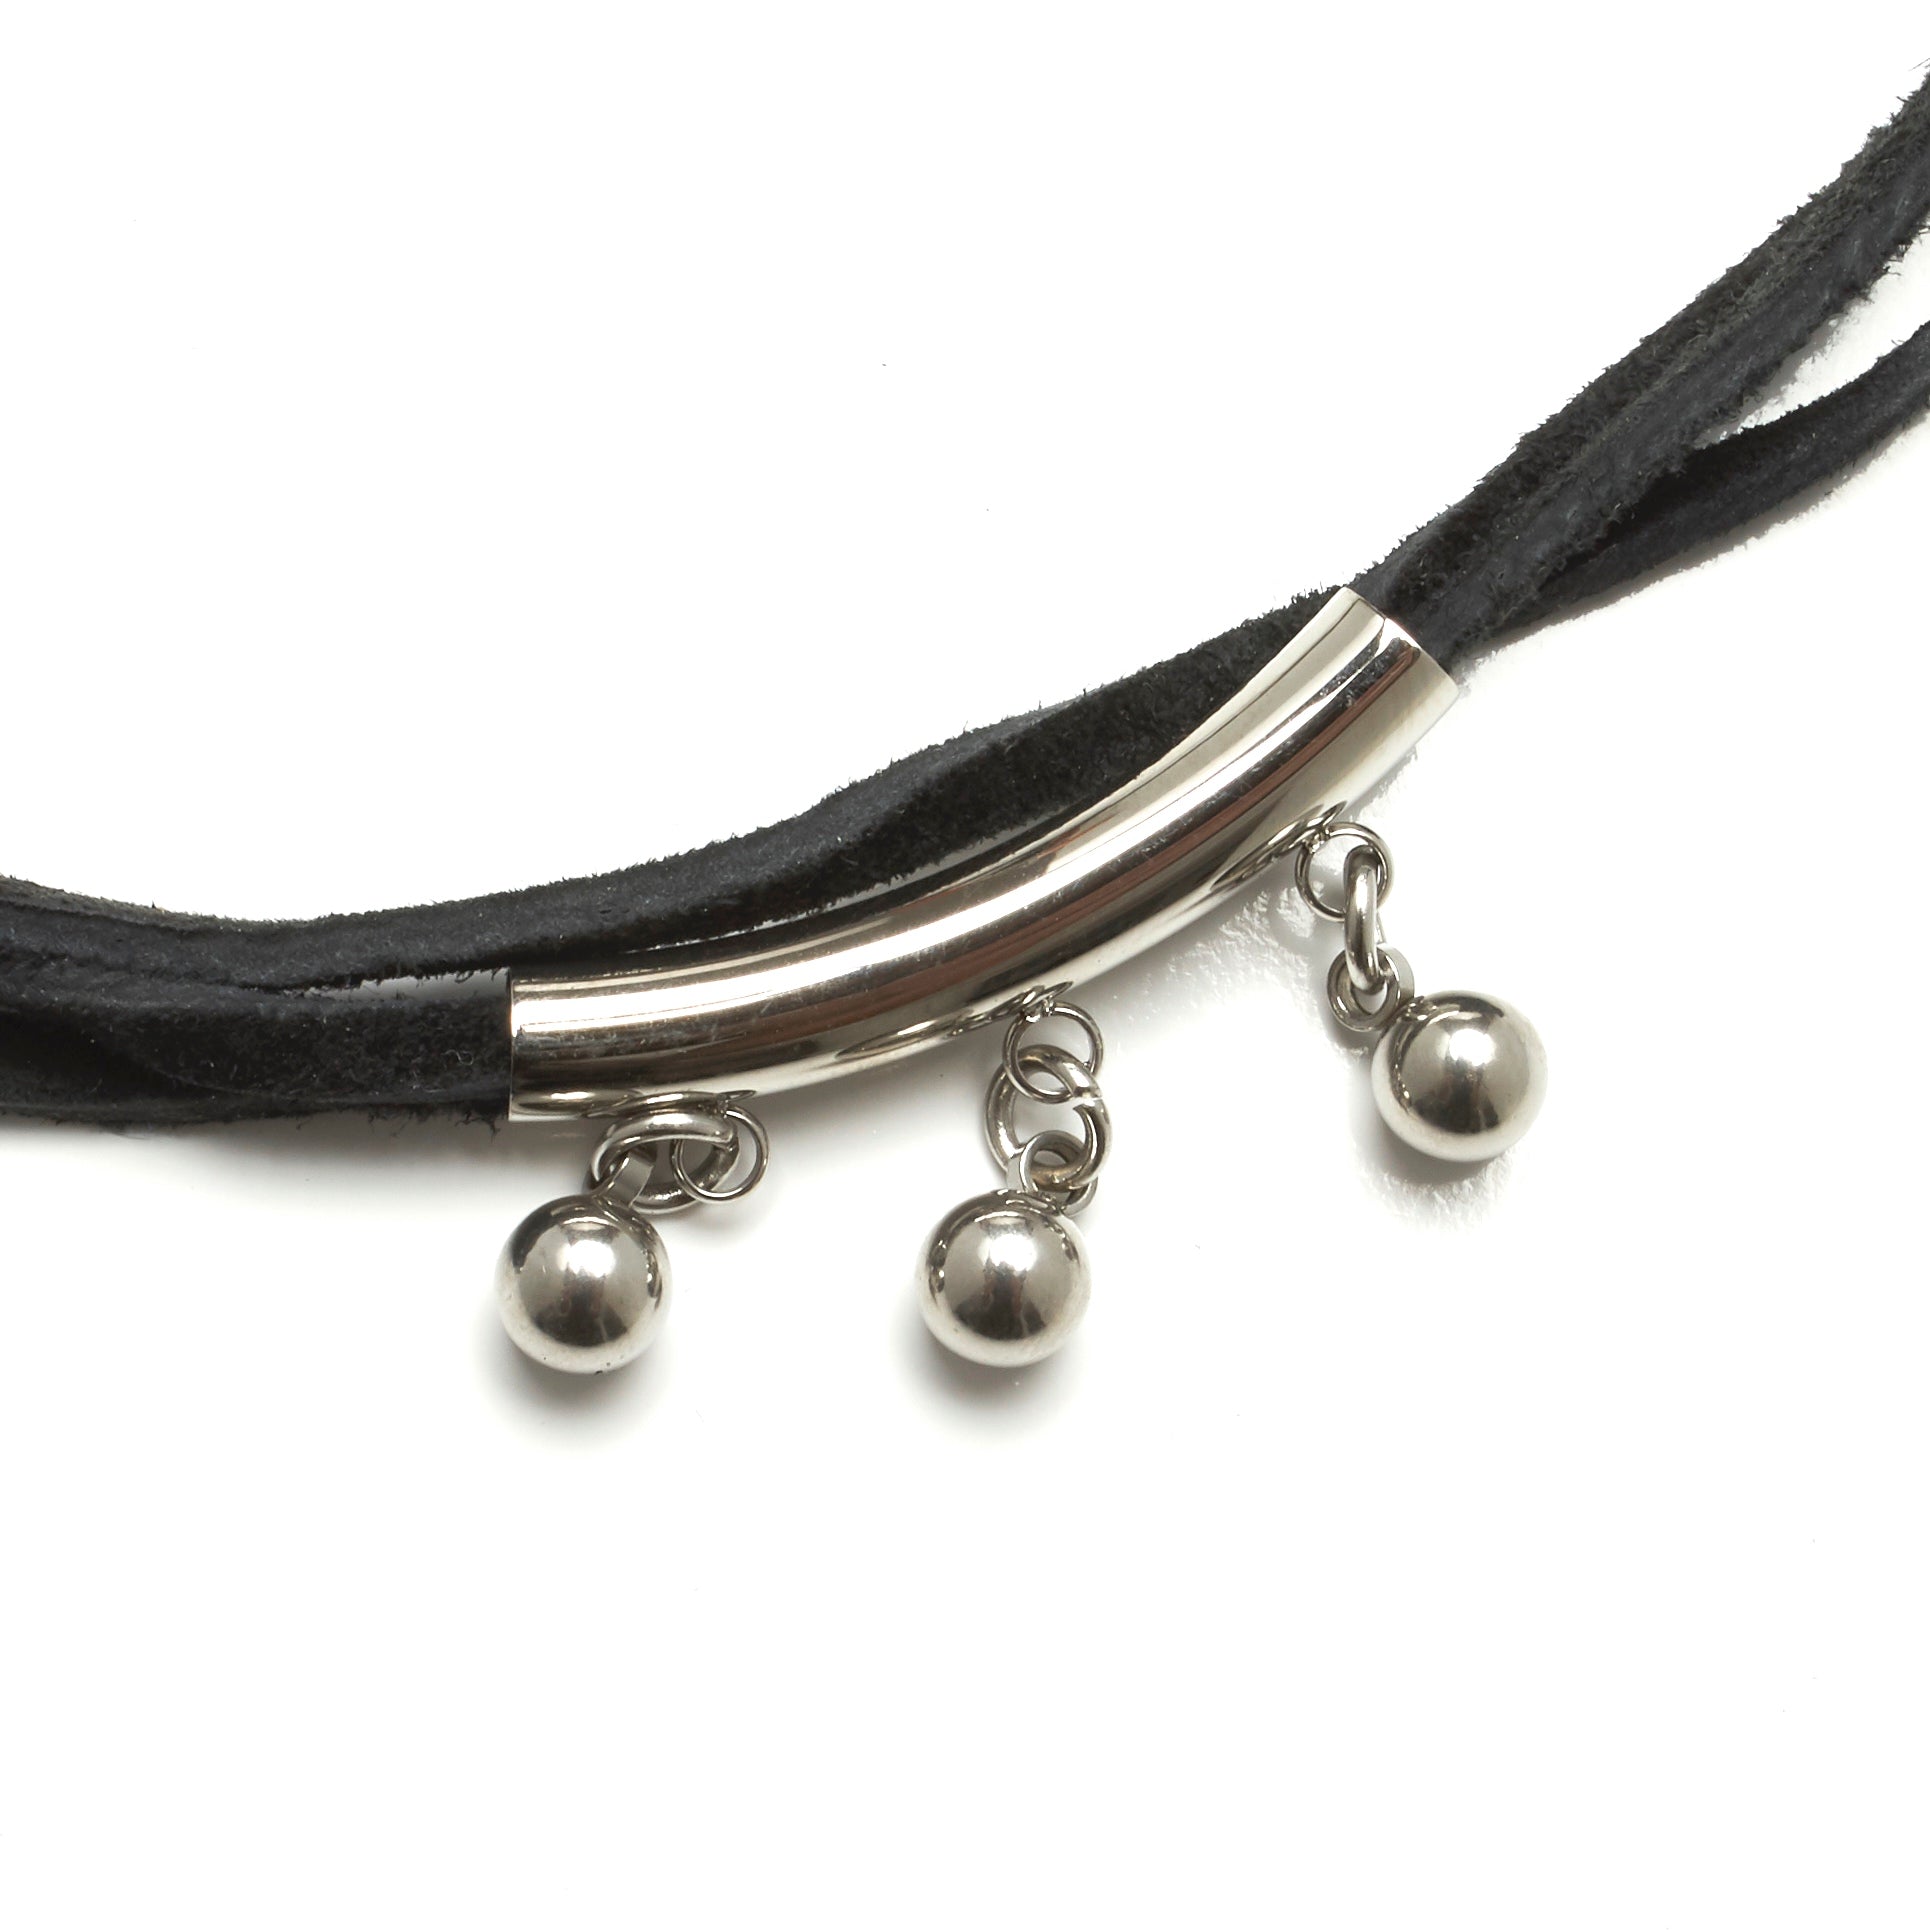 2 in 1 necklace and wraparound bracelet made of suede and stainless steel